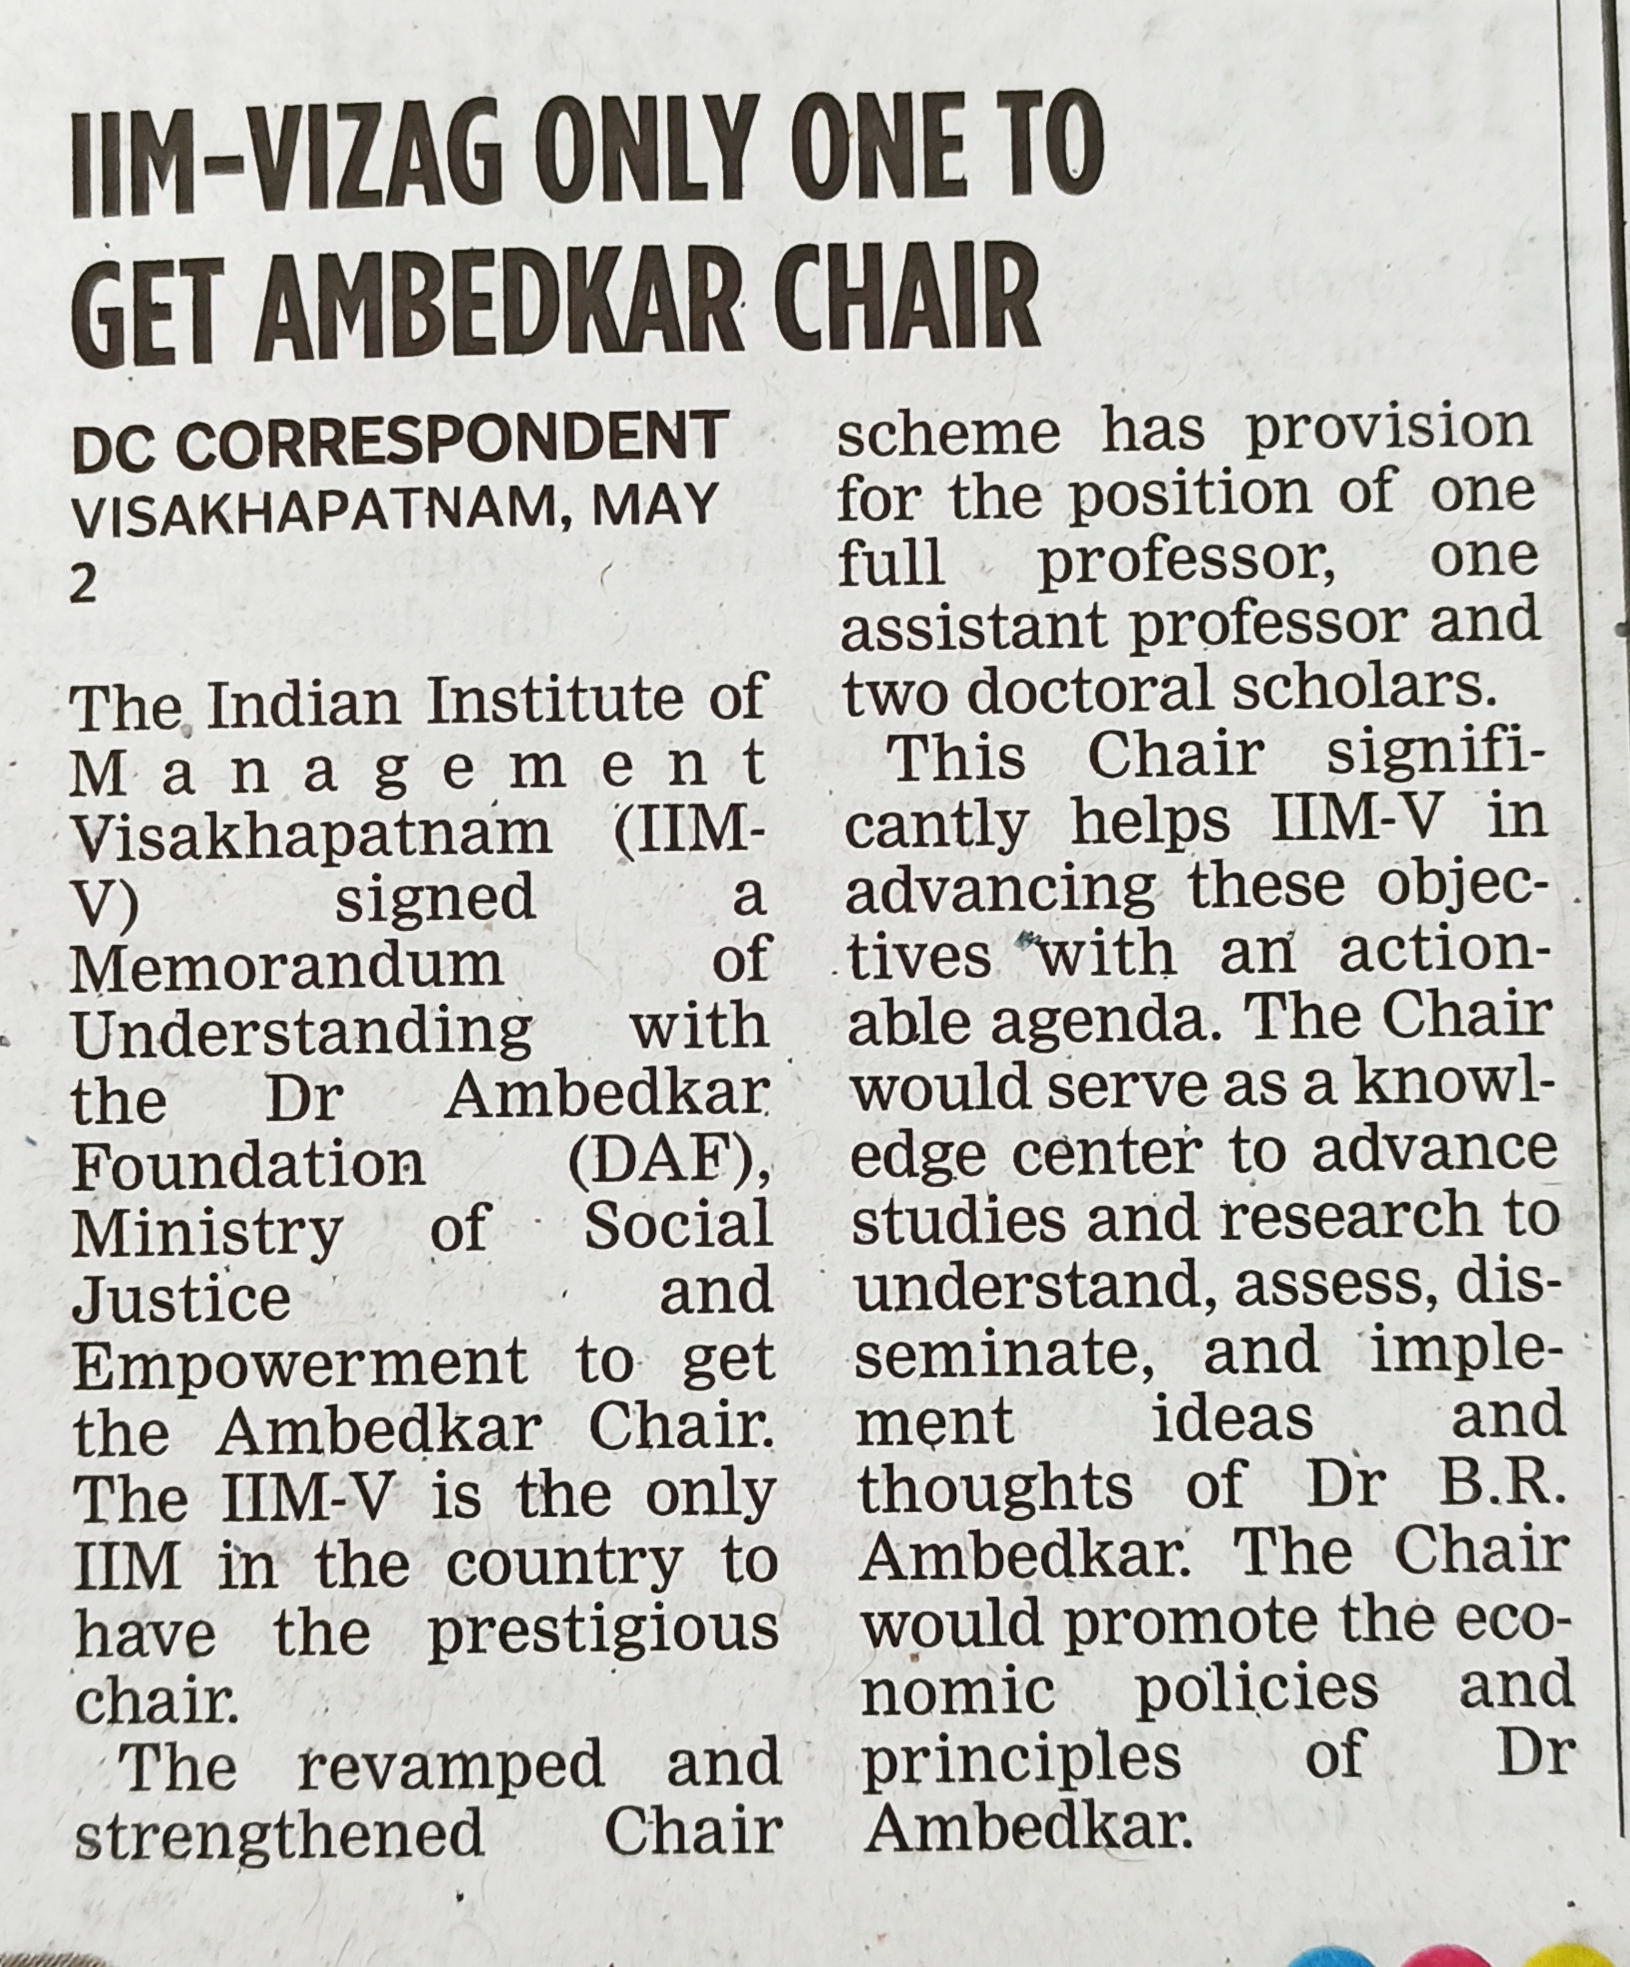 IIMV has been awarded the Dr Ambedkar Chair by the Union ministry of social justice and empowerment - 03.05.2022